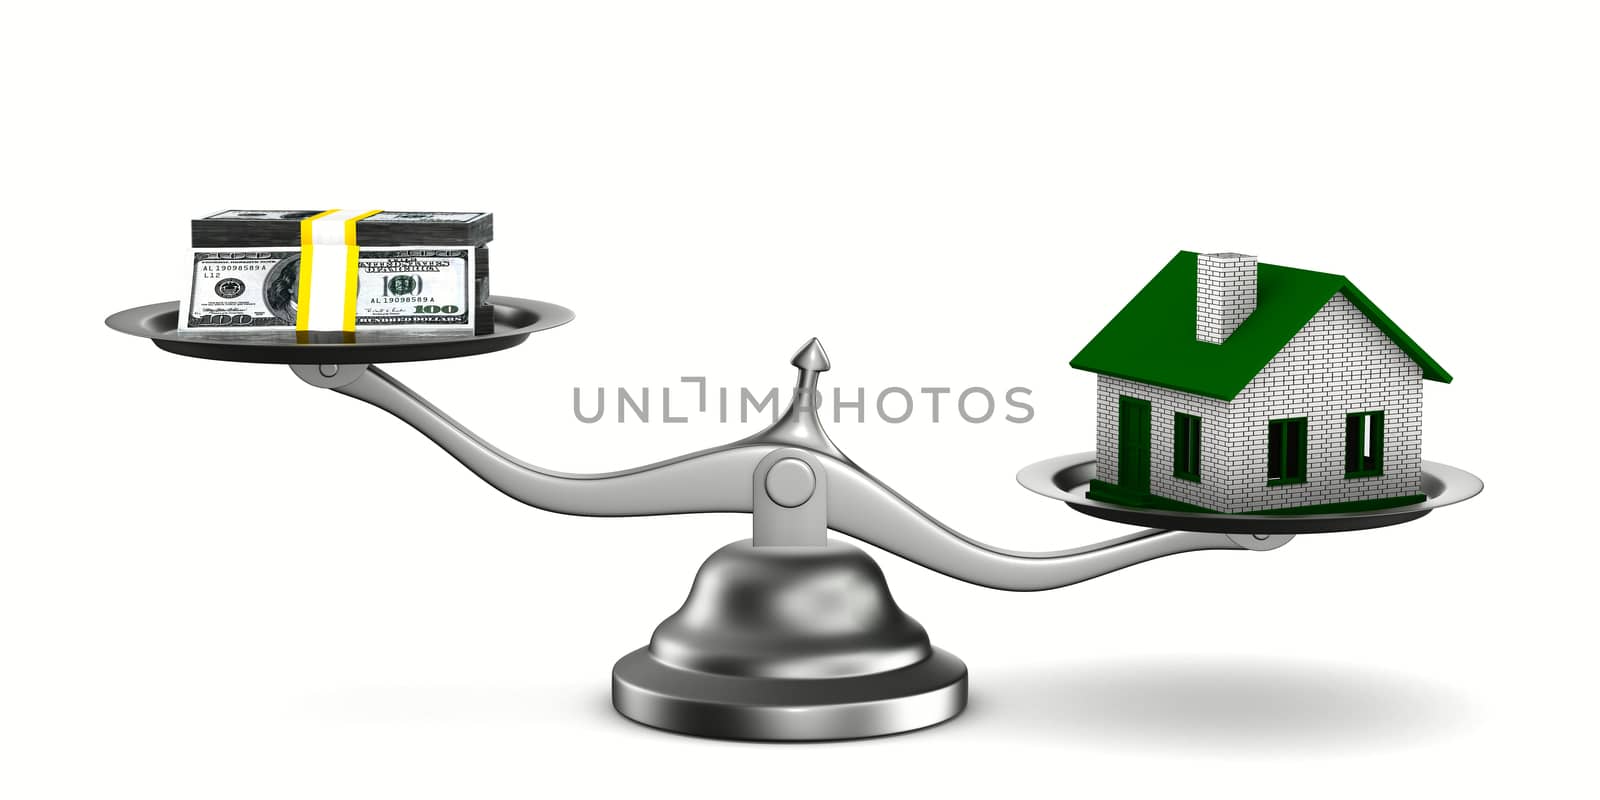 House and money on scales. Isolated 3D image